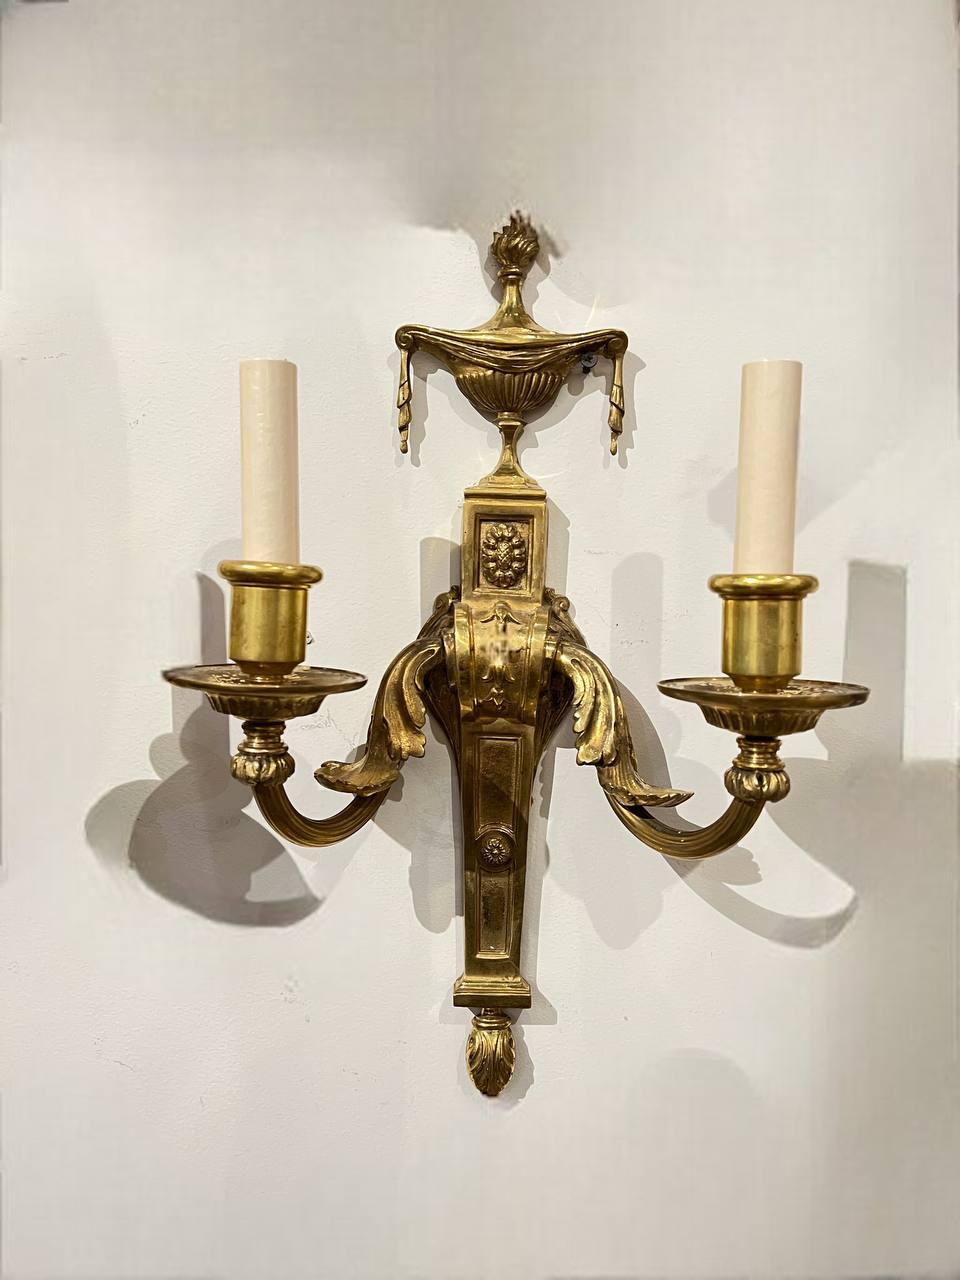 Neoclassical 1920's Caldwell Neoclassic Sconces For Sale